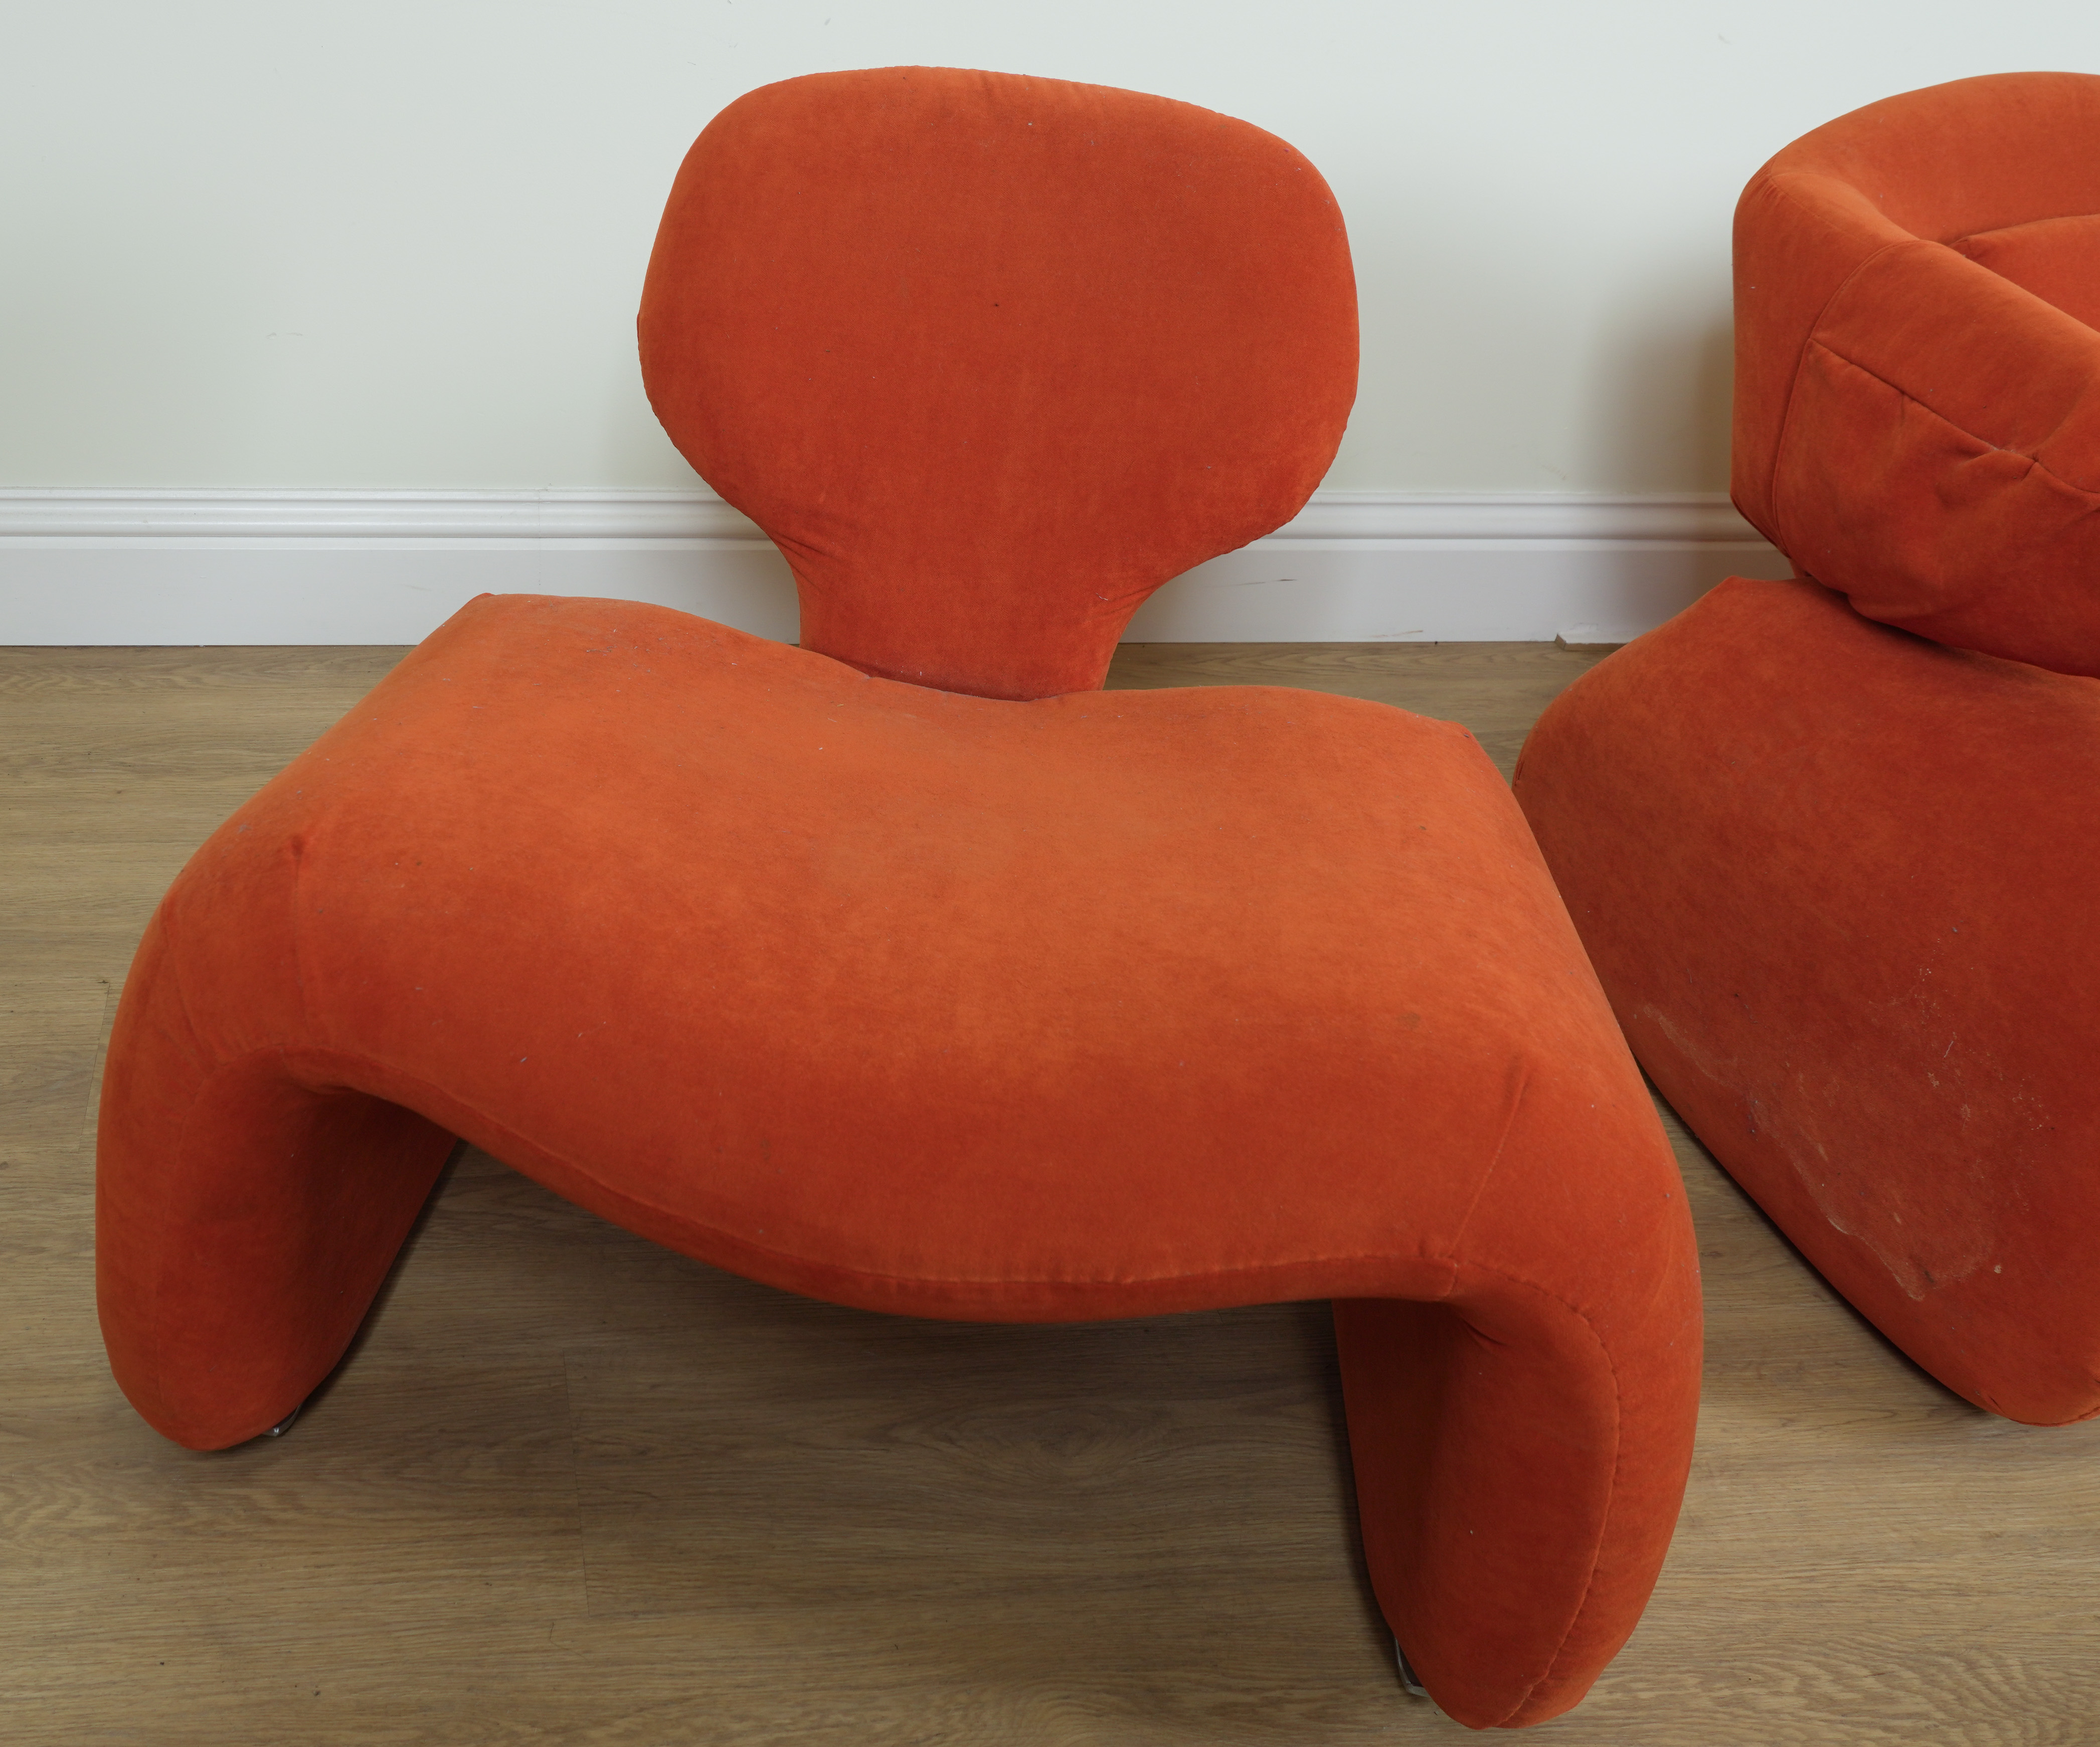 PROBABLY OLIVIER MOURGUE; AN ORANGE UPHOLSTERED SOFA AND CHAIRS (5) - Image 10 of 11